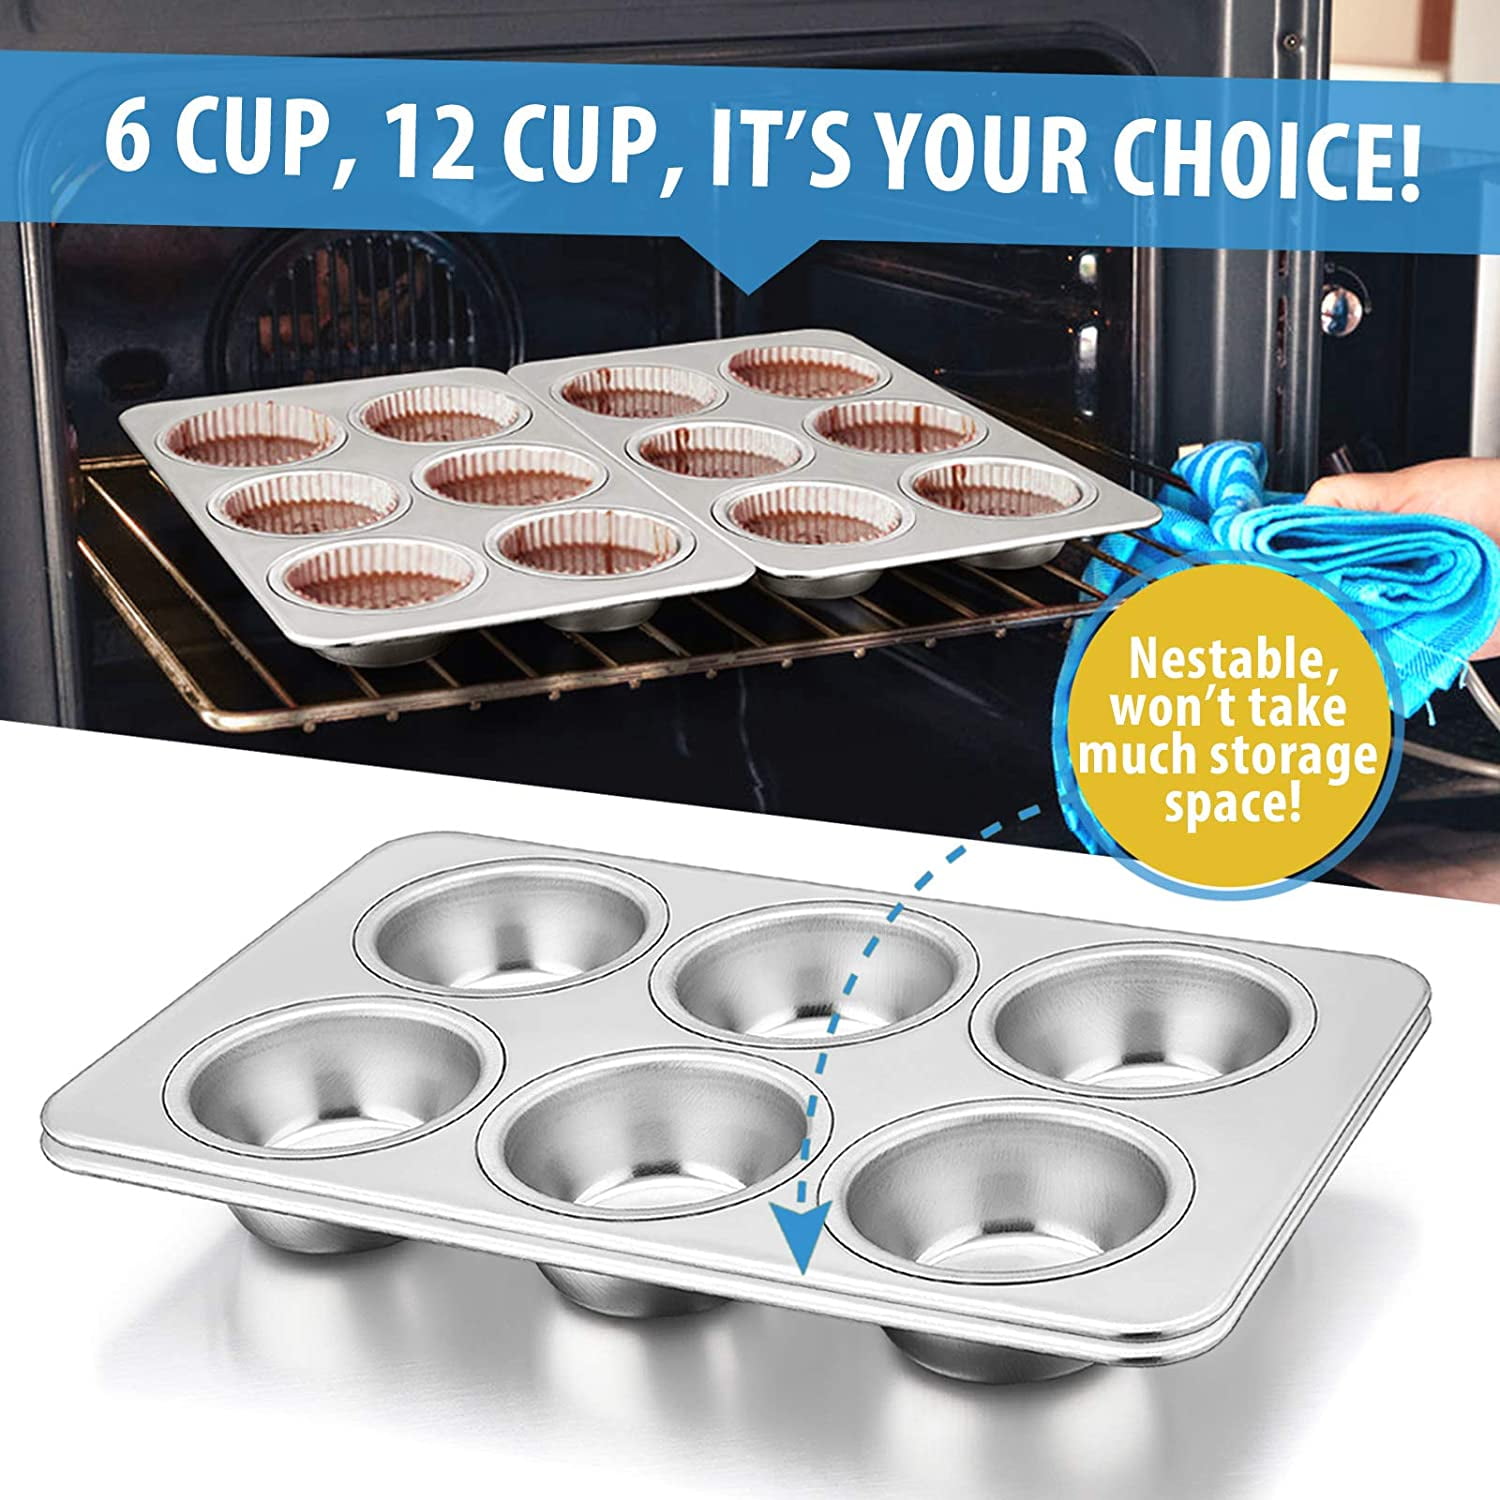 TeamFar Muffin Pans for Baking, Cupcake Pan Tray Set for Making Cakes  Cornbread Quiche and More, Healthy & Non Toxic, Oven & Dishwasher Safe -  Set of